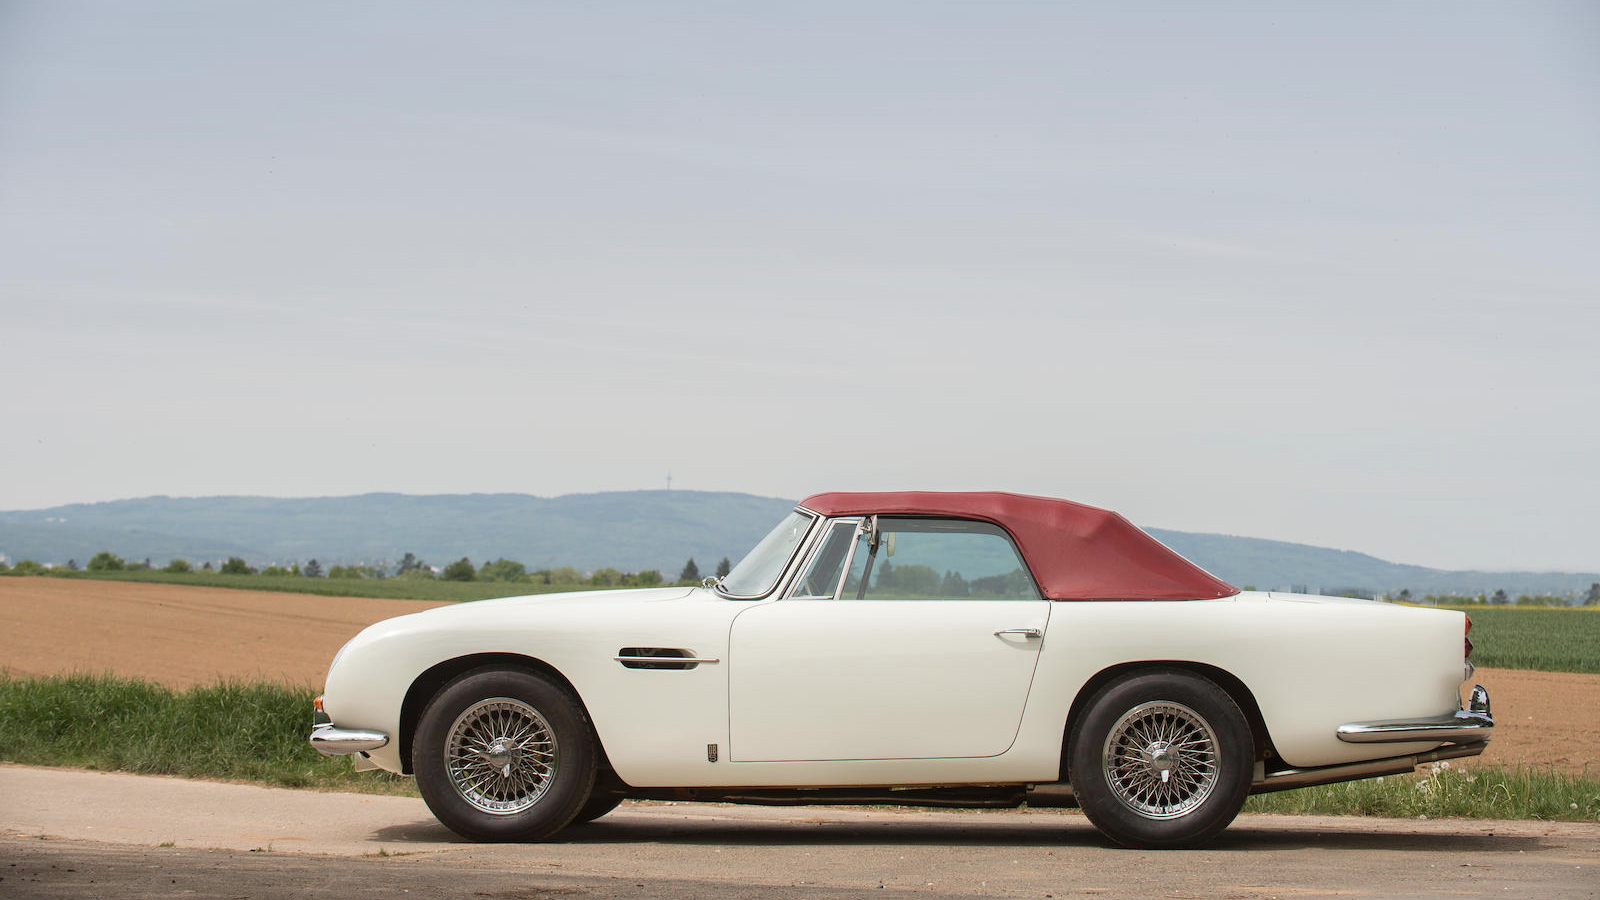 Ultra-rare Aston Martin expected to sell for £900,000 this weekend